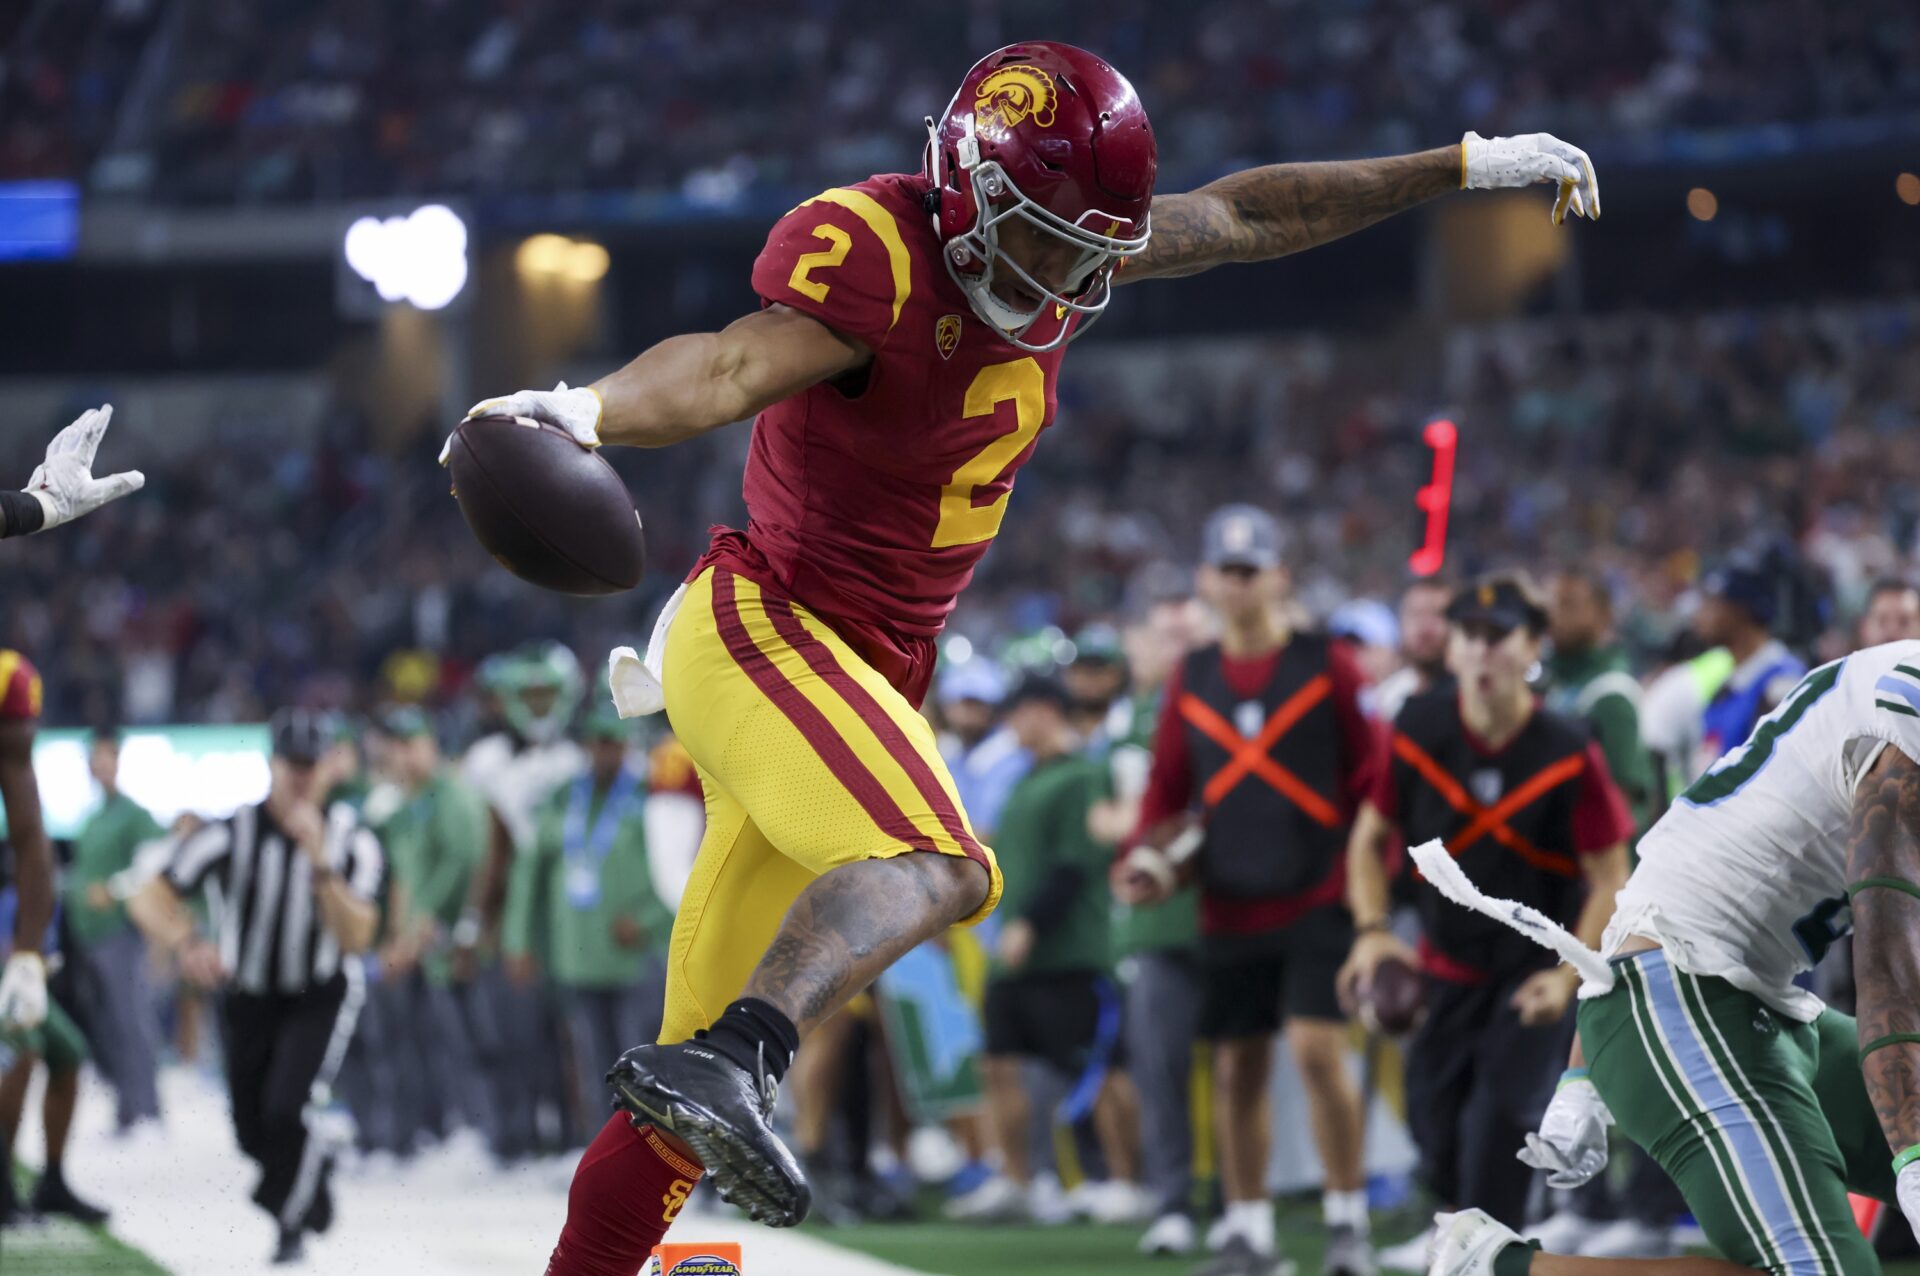 USC Trojans WR Brenden Rice (2) scores a touchdown against Tulane in the Cotton Bowl.